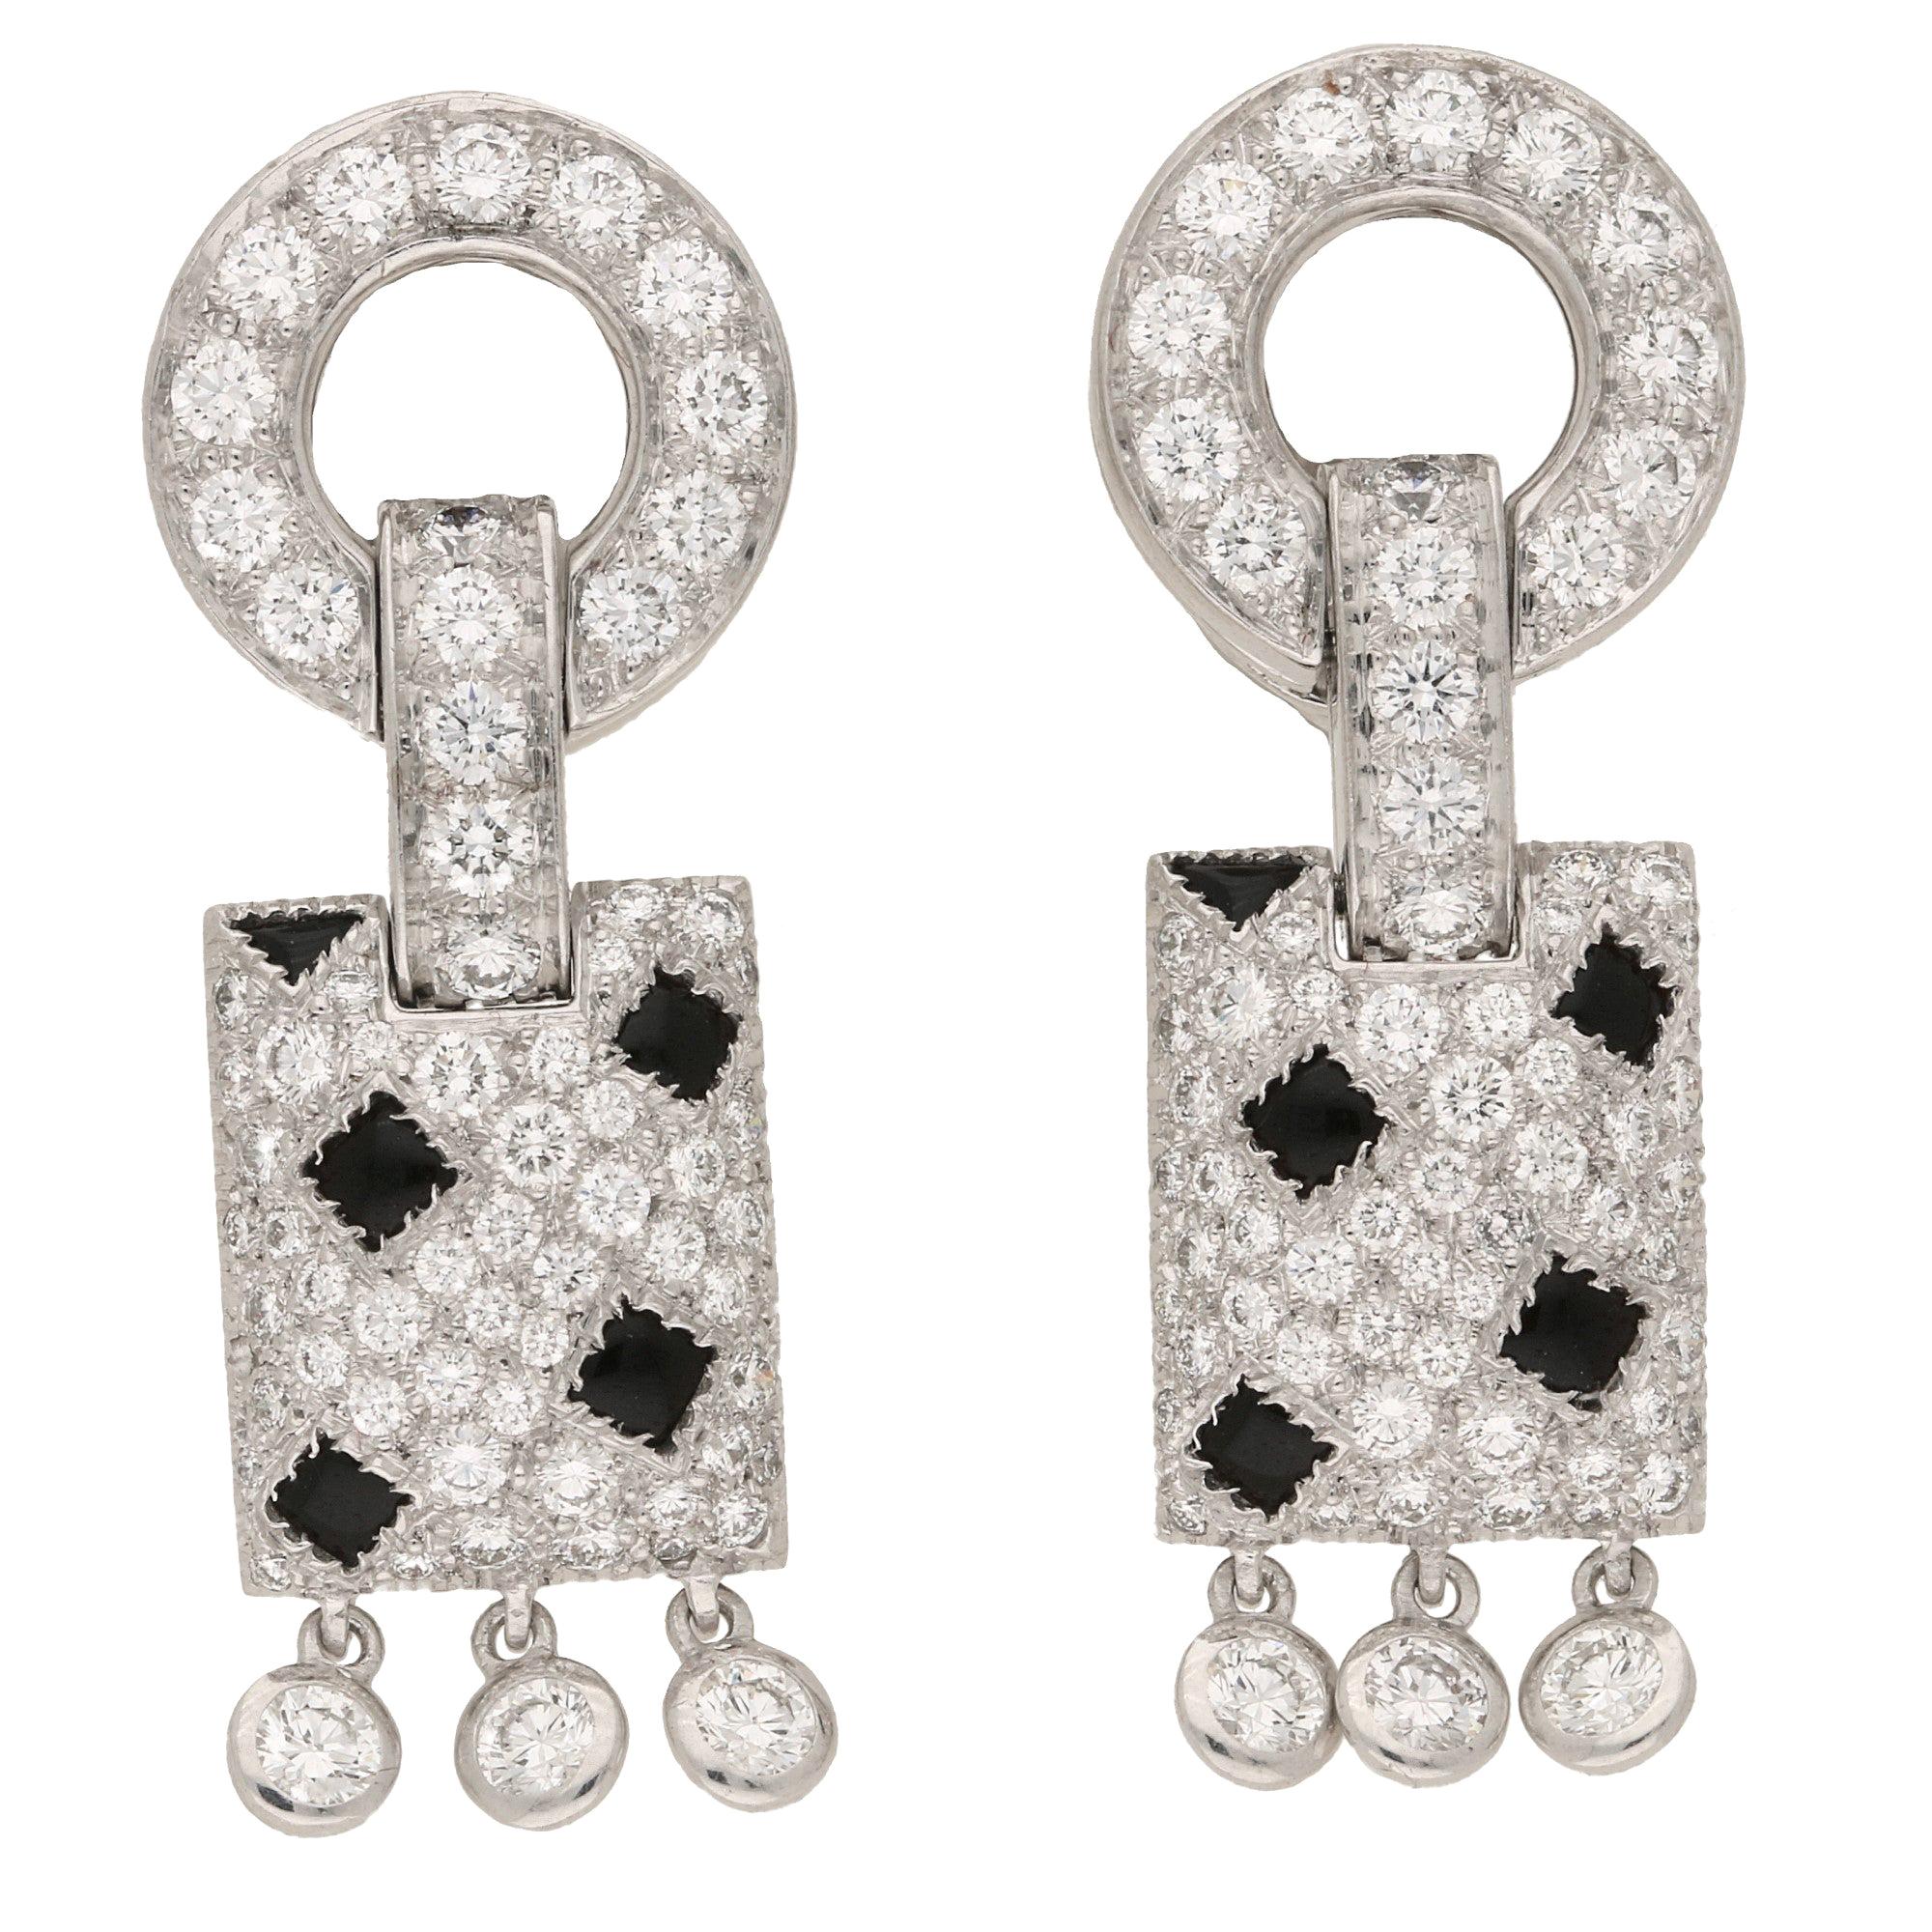 Cartier Pelage Panther Earrings in 18K White Gold, Diamond and Onyx